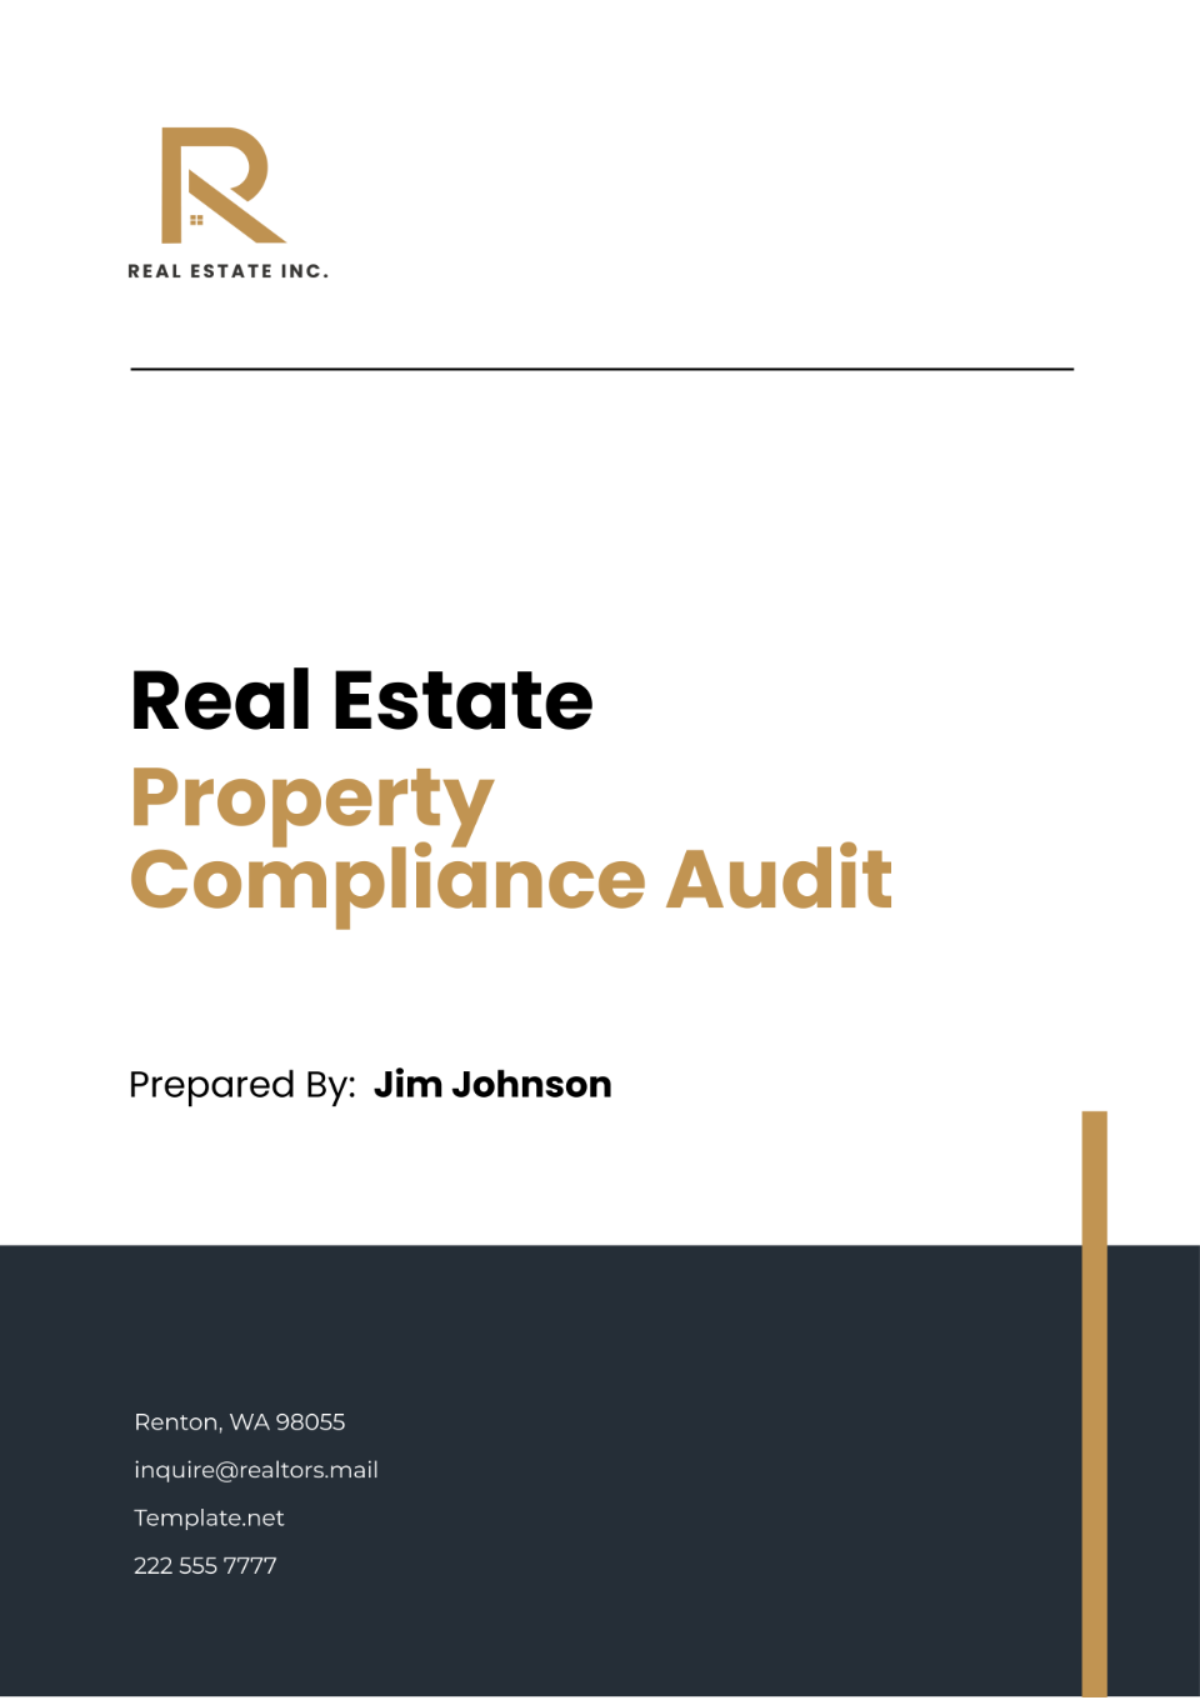 Free Real Estate Property Compliance Audit Template